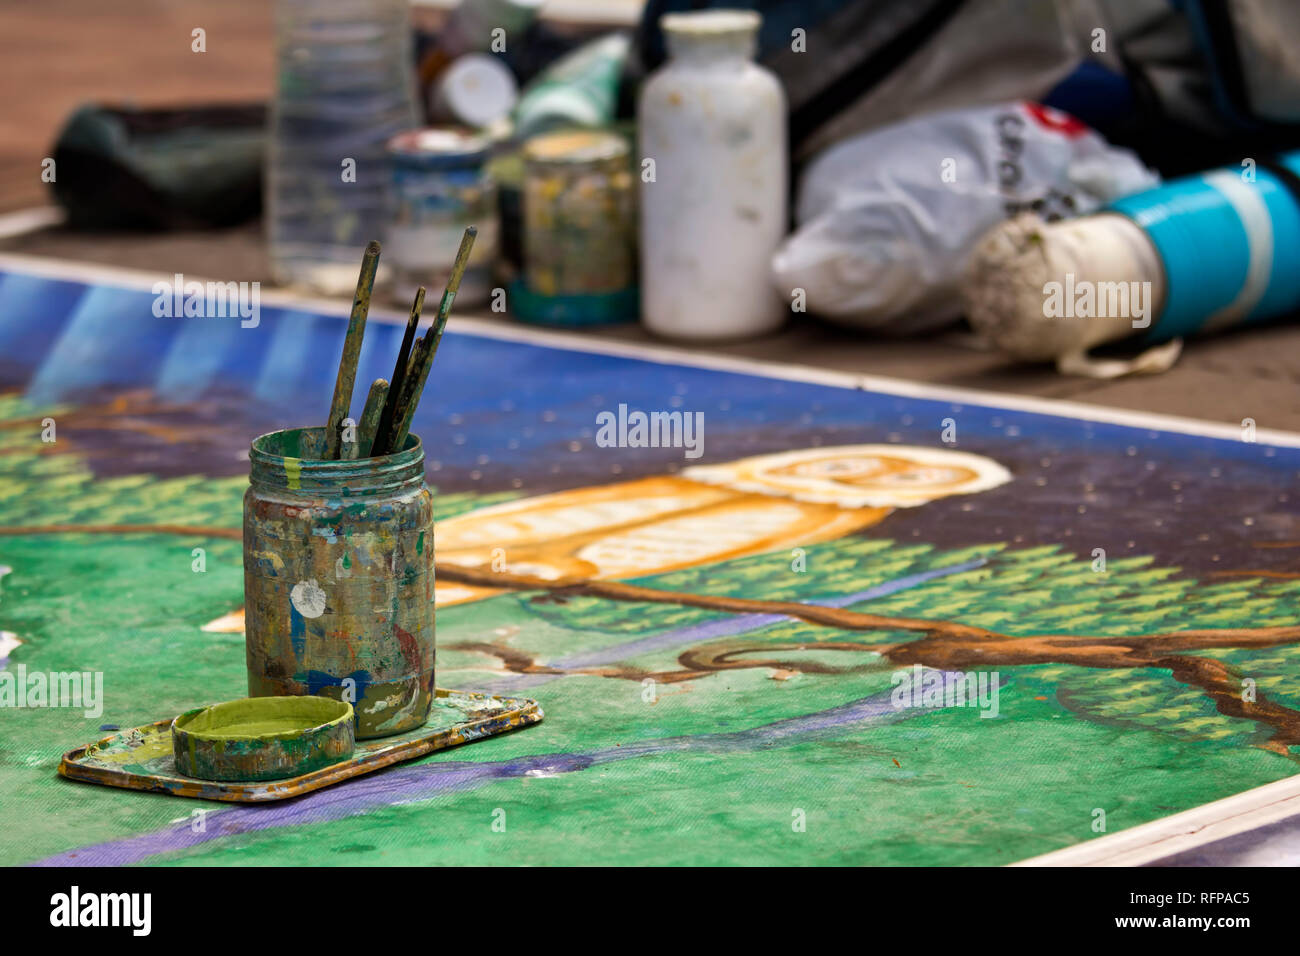 Tools of a street painter in a public street. Stock Photo